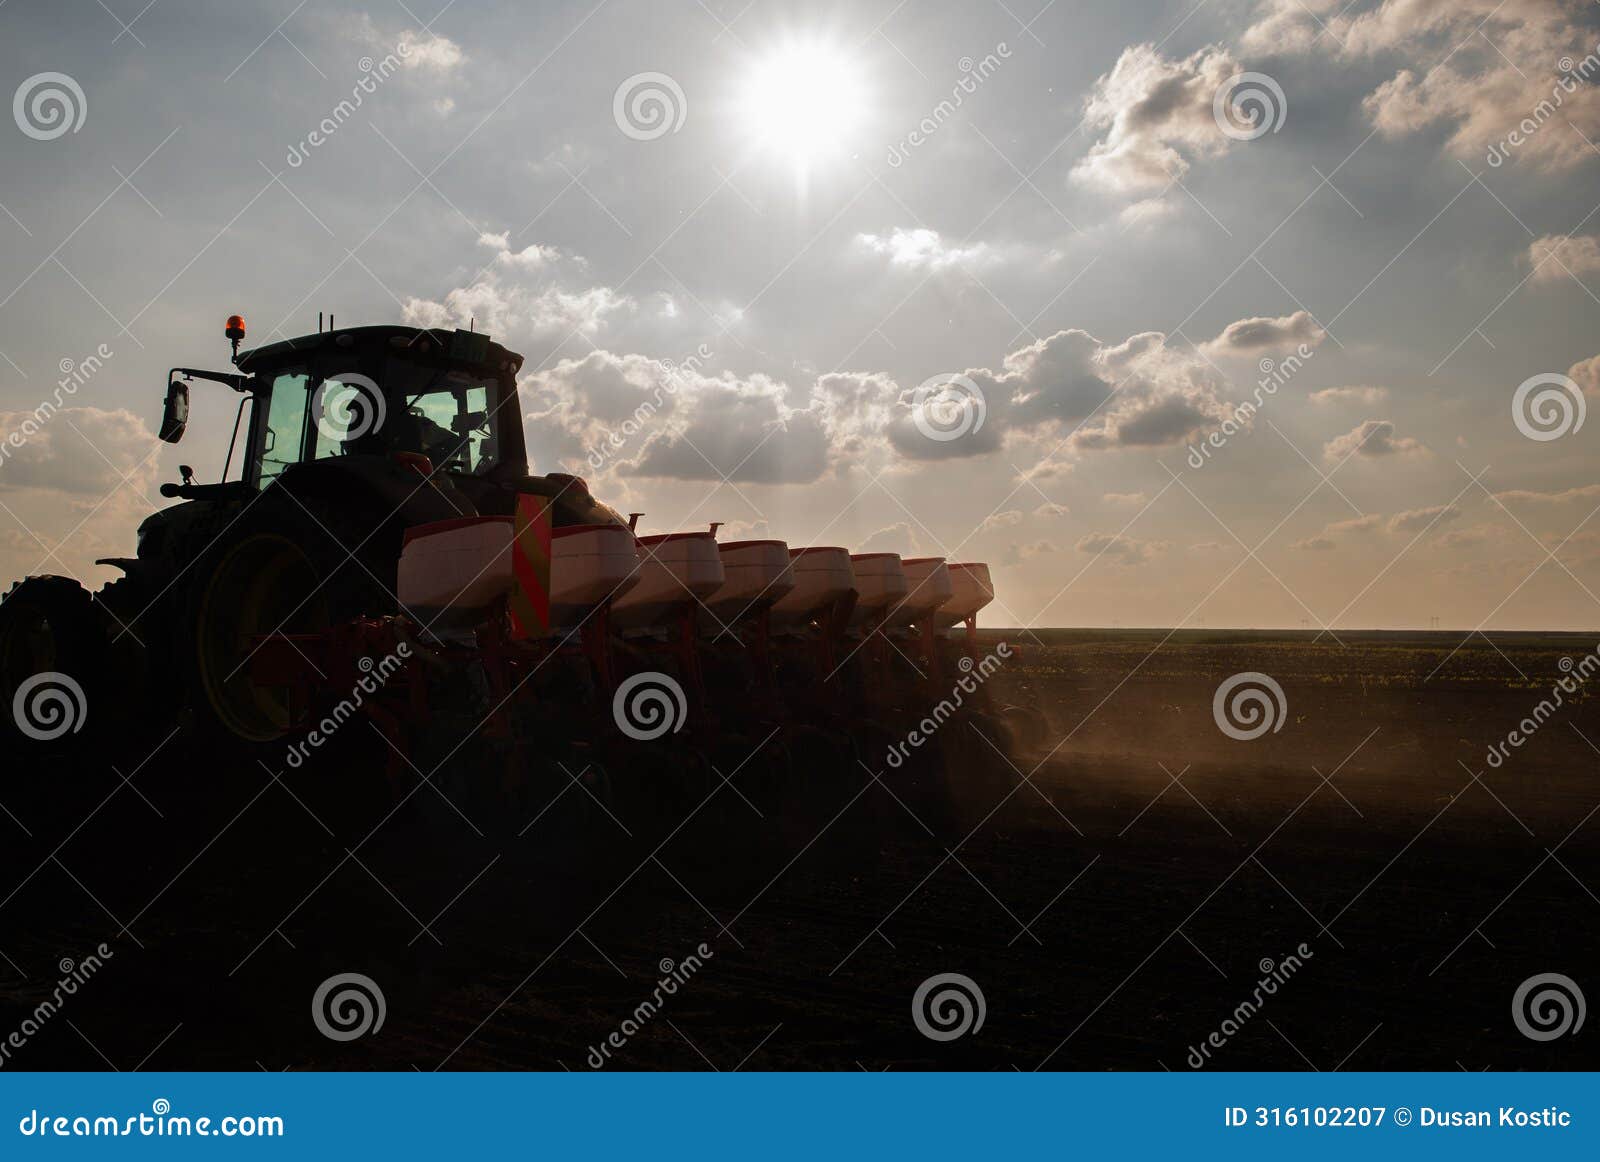 farmer with tractor seeding in sunset